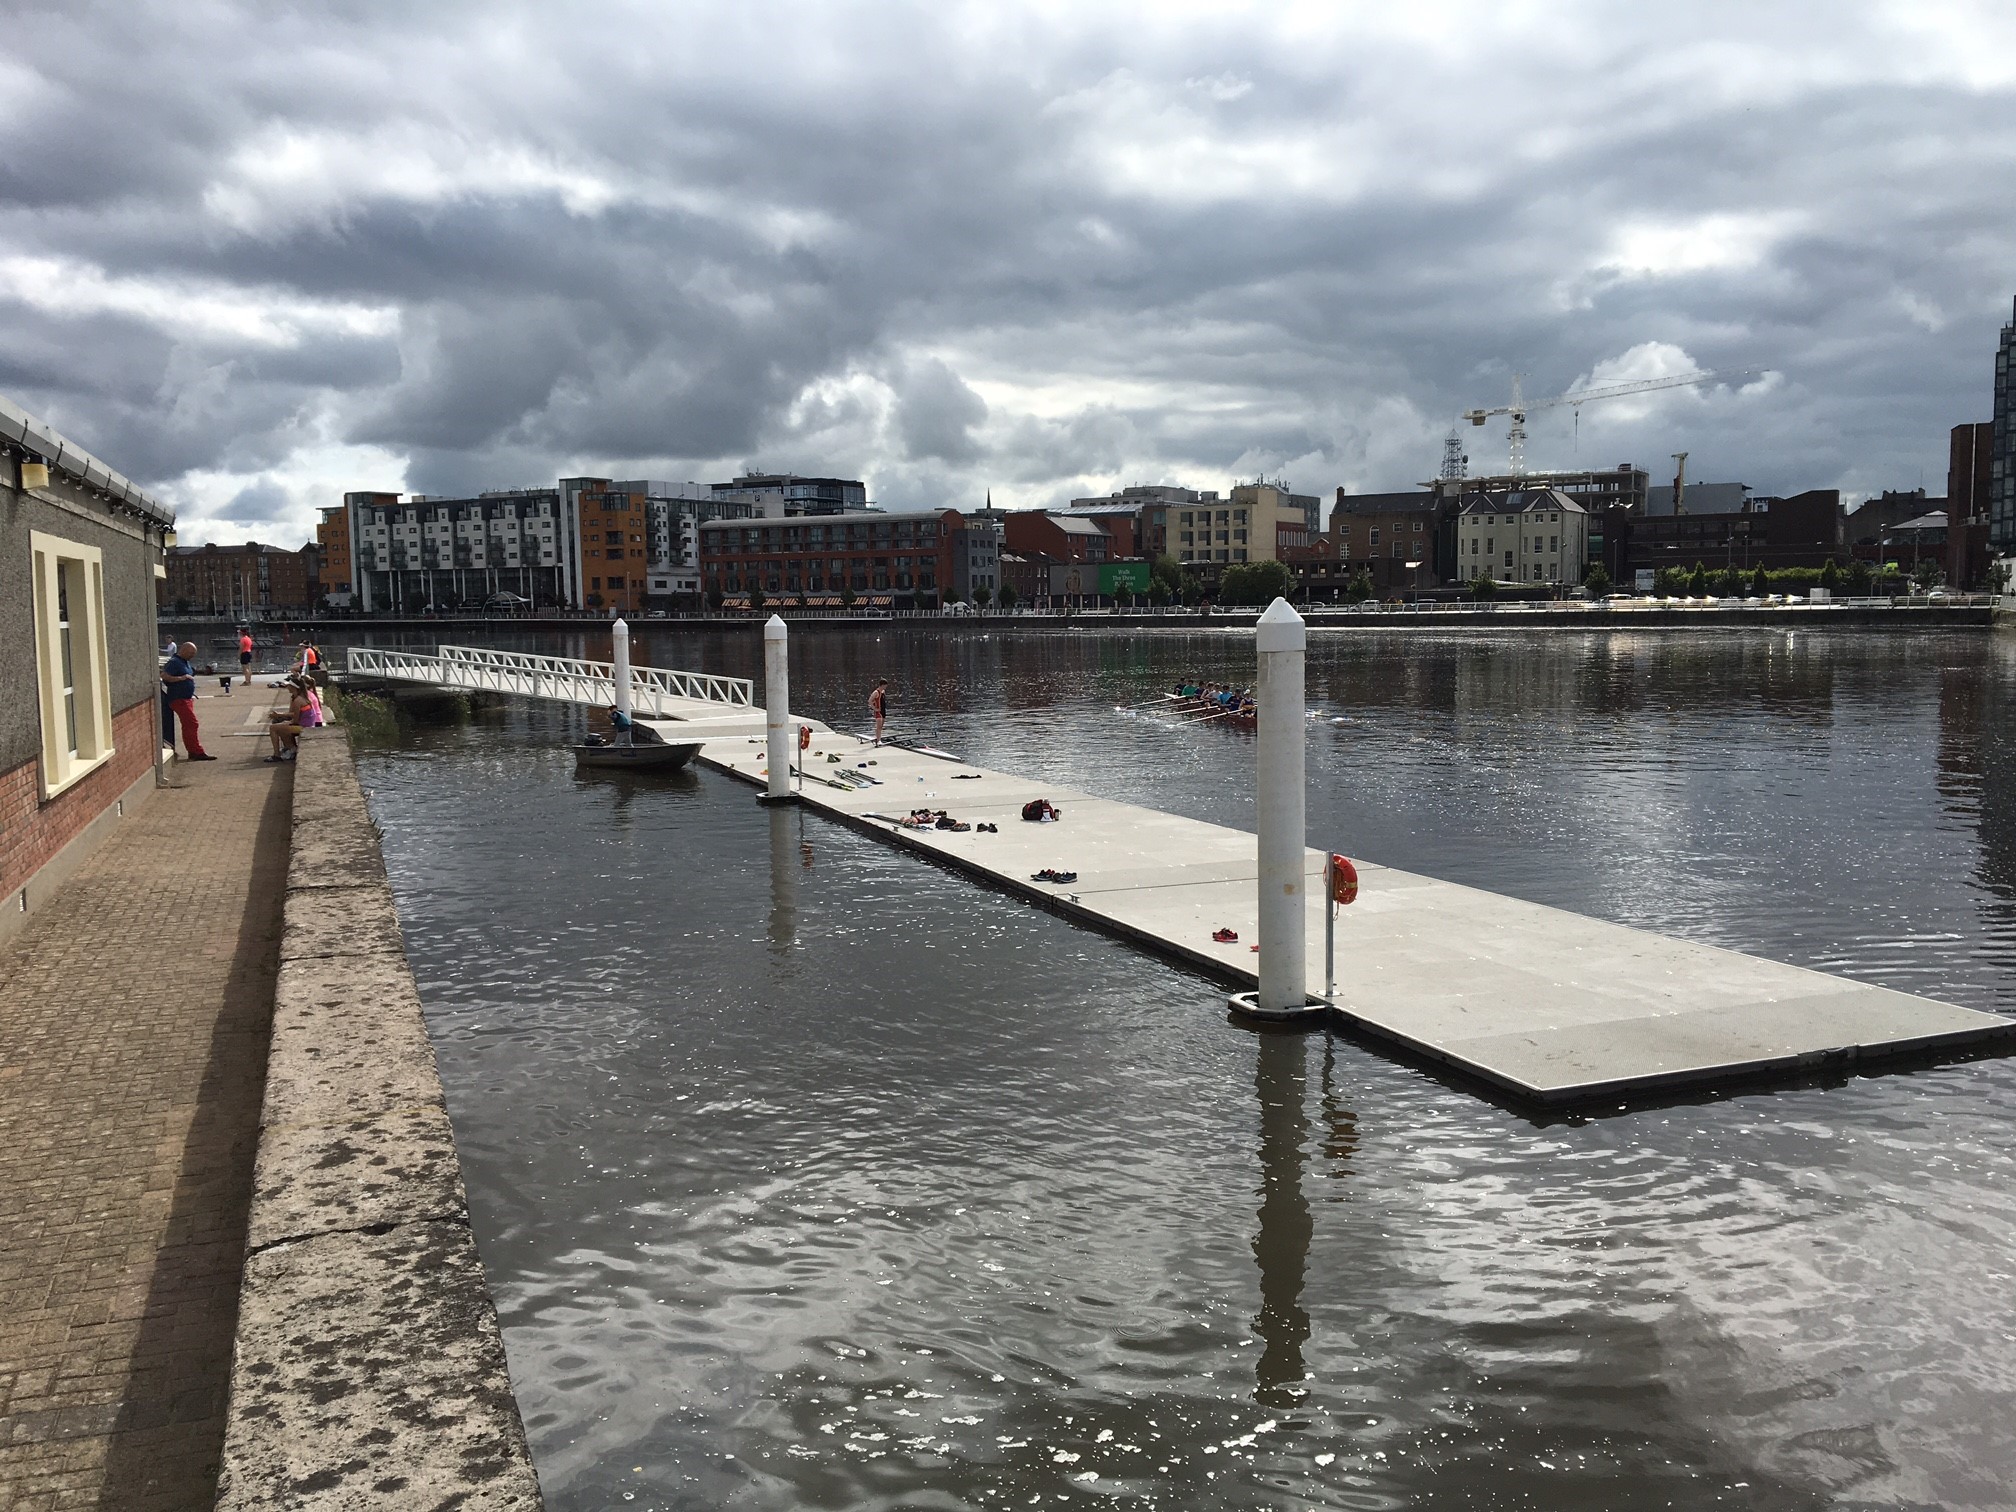 Riverside rowing pontoon moored on piles on the River Shannon